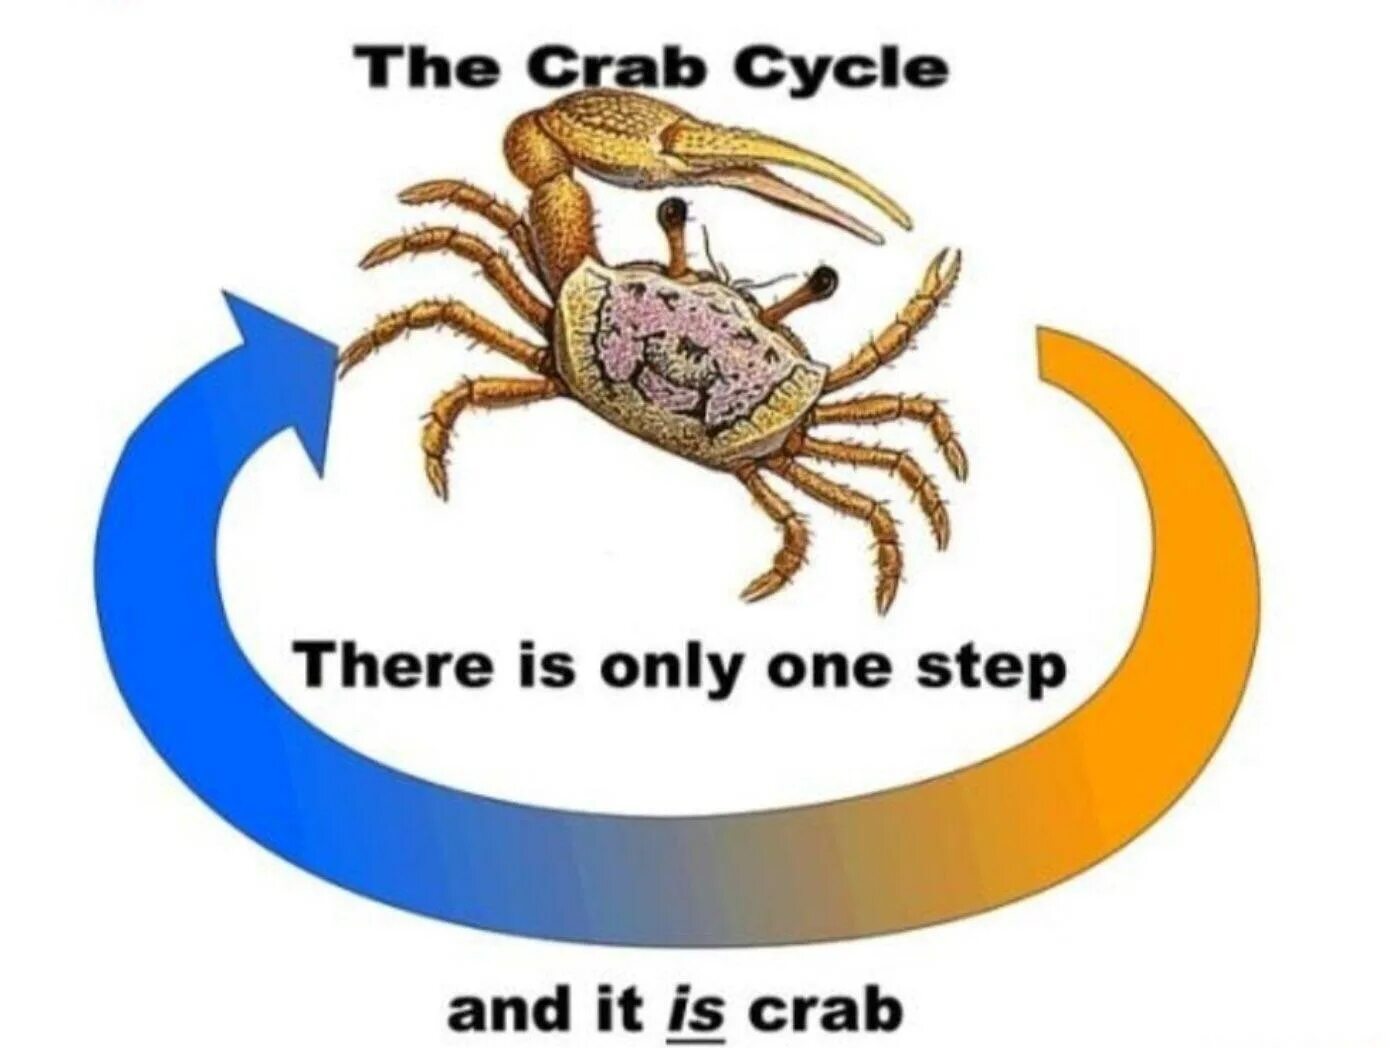 Мемы с крабами. Спай краб. Краб Мем. Crab Cycle there is only i Step.